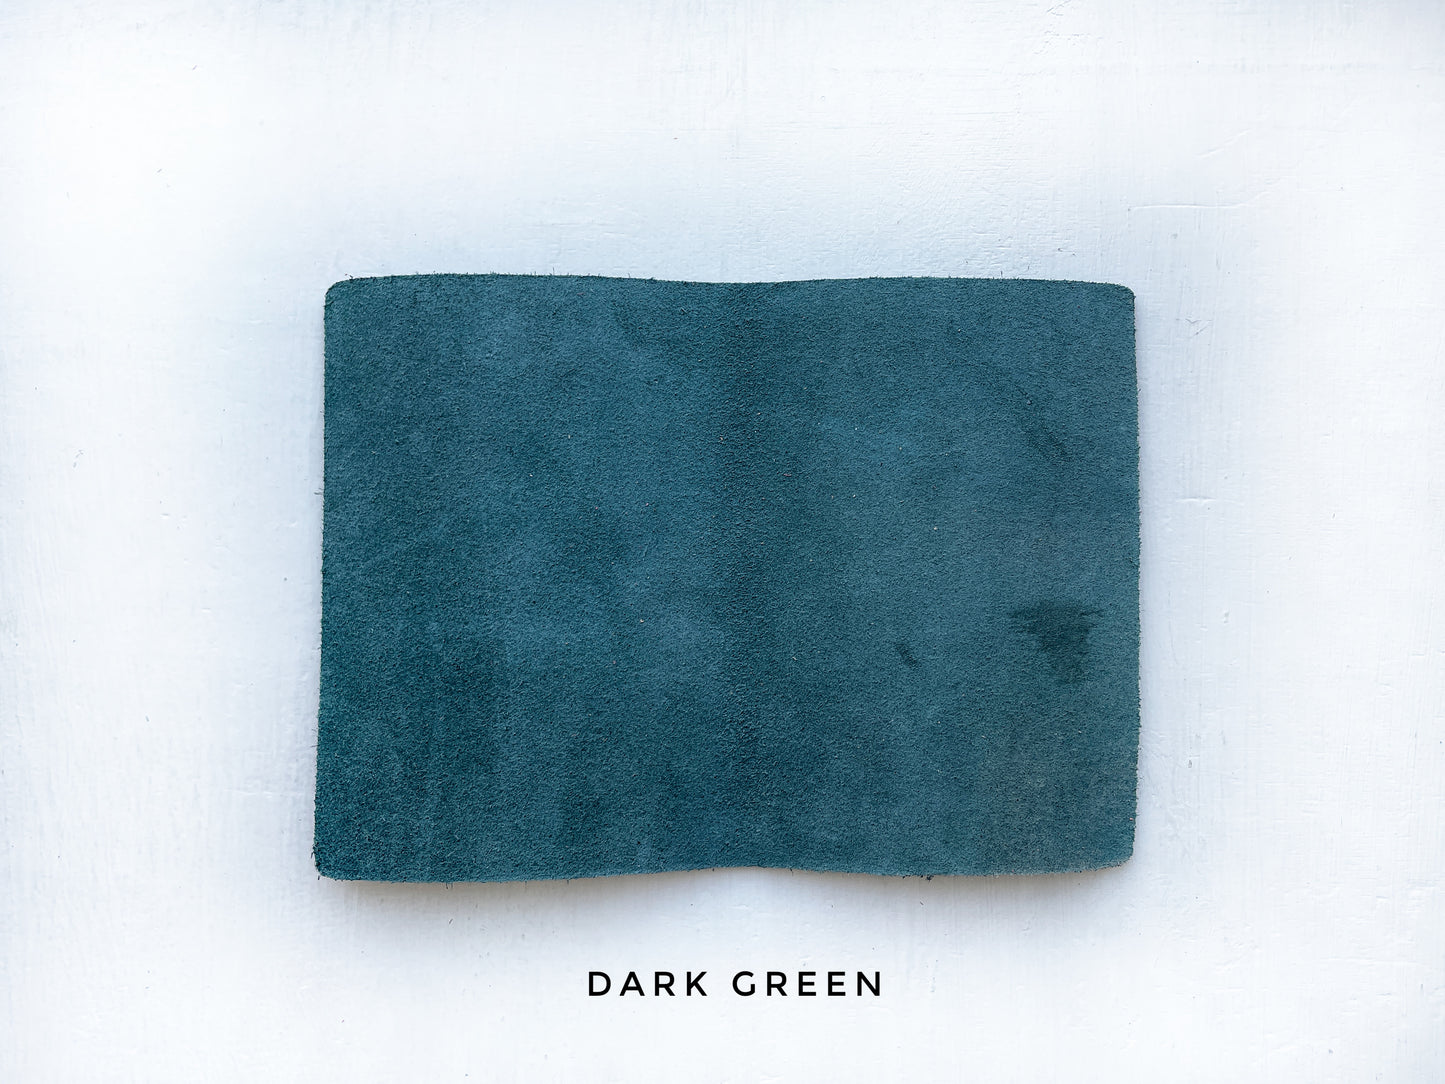 DARK GREEN LEATHER COVER